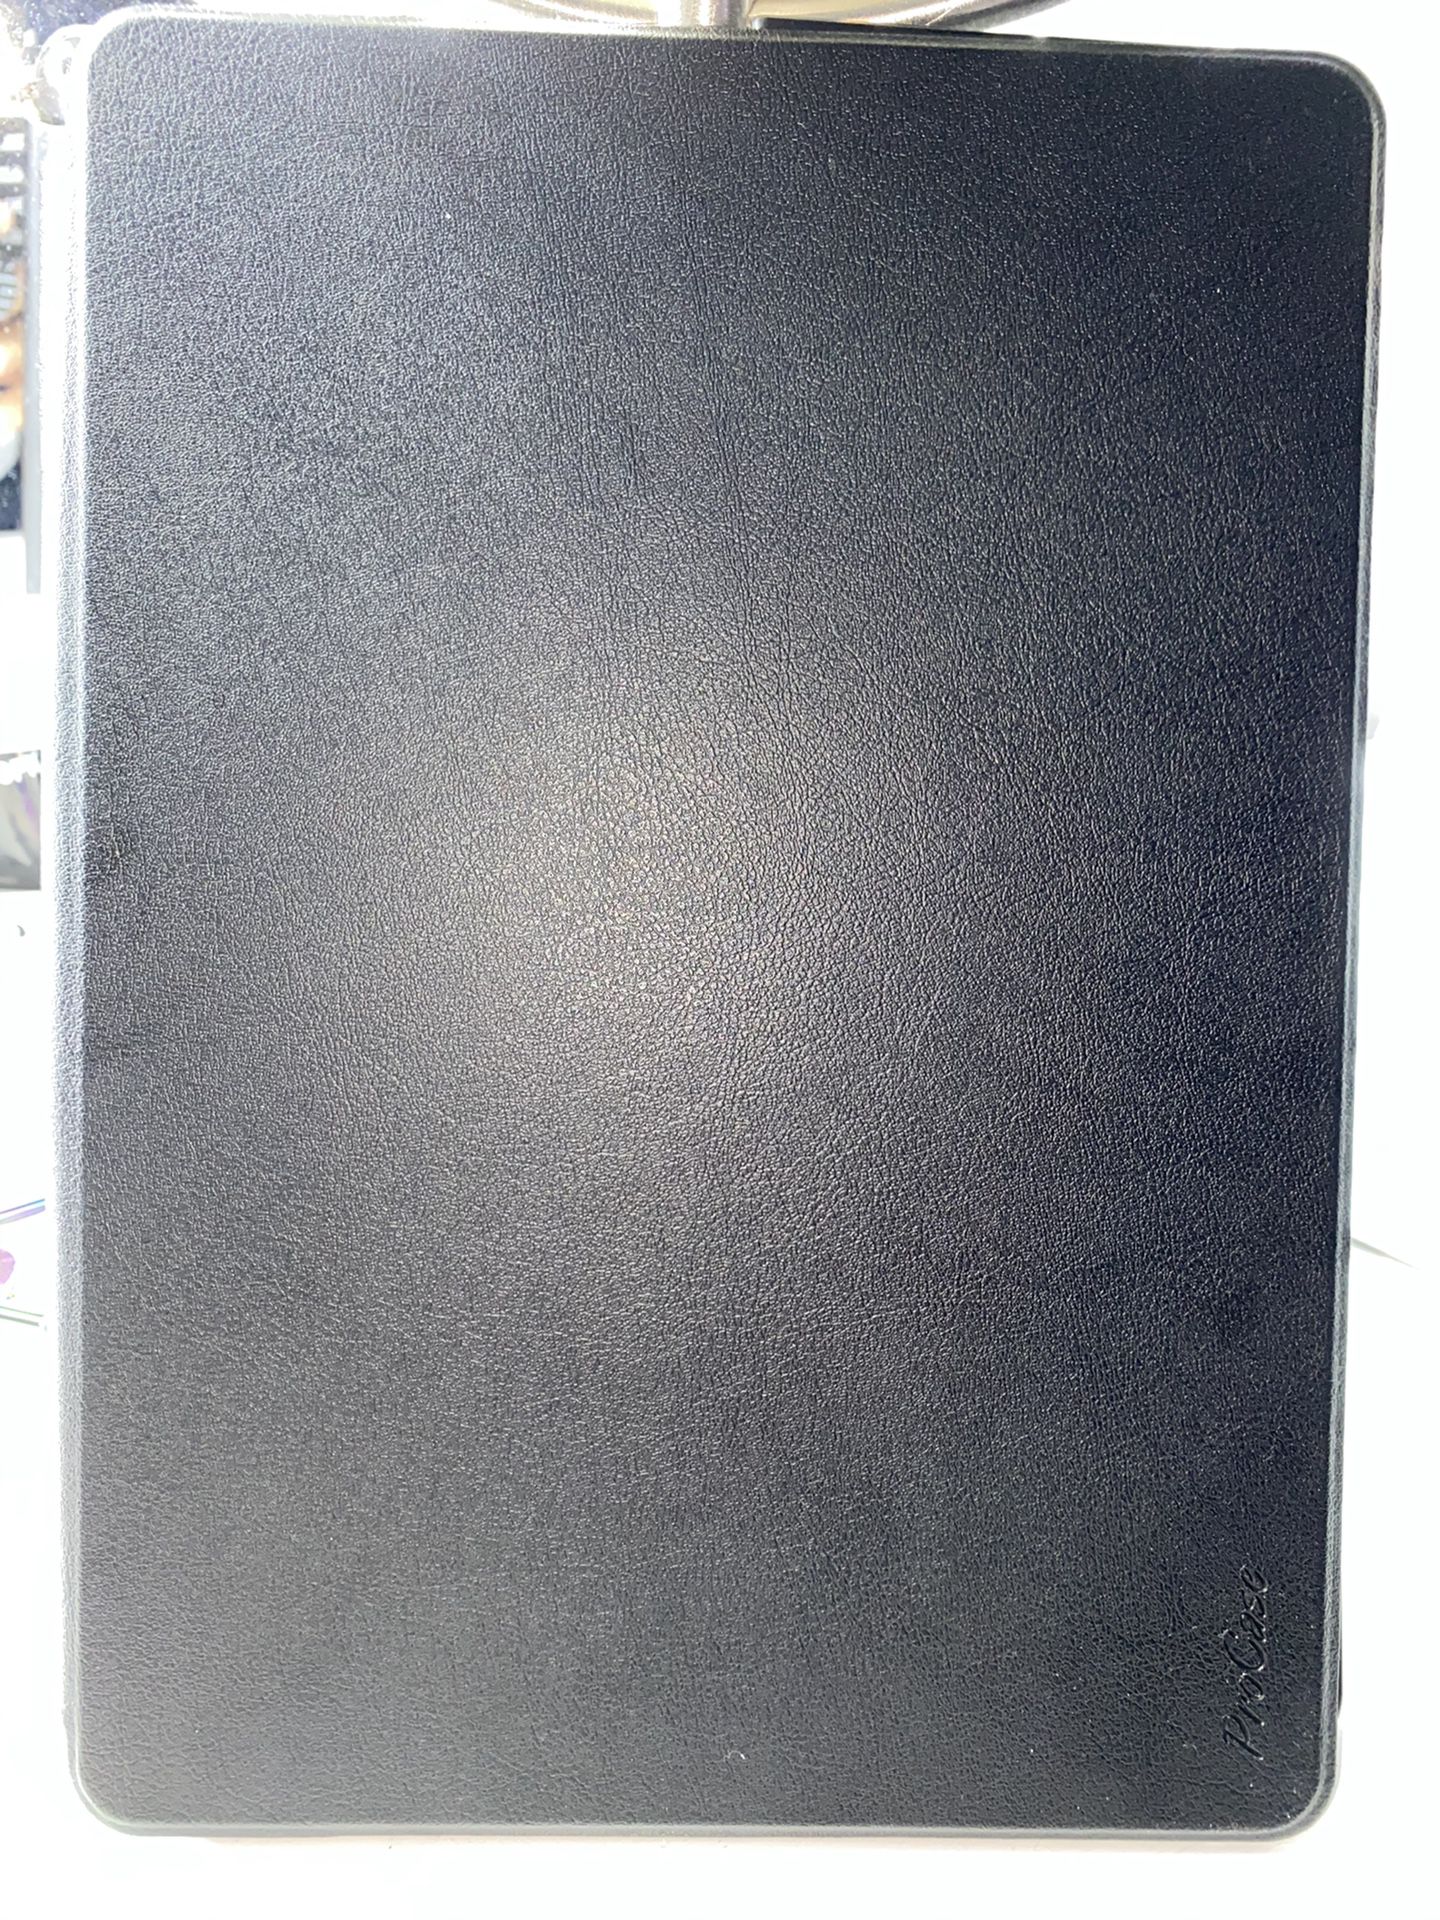 Microsoft surface go 2 cover